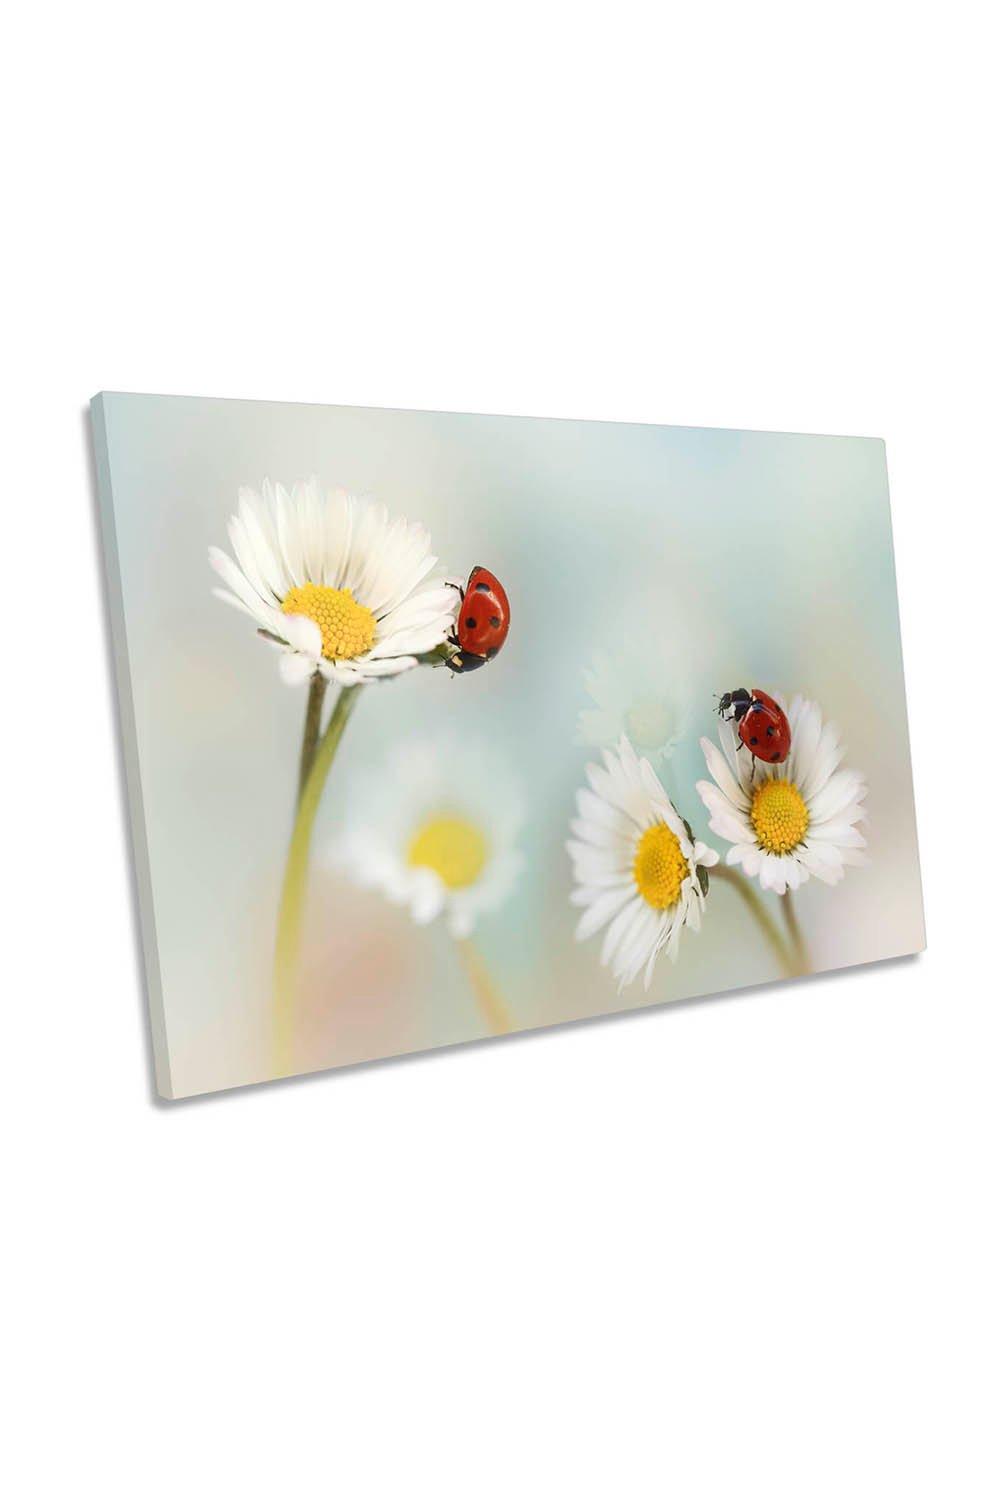 Springtime White Flower Red Ladybirds Canvas Wall Art Picture Print